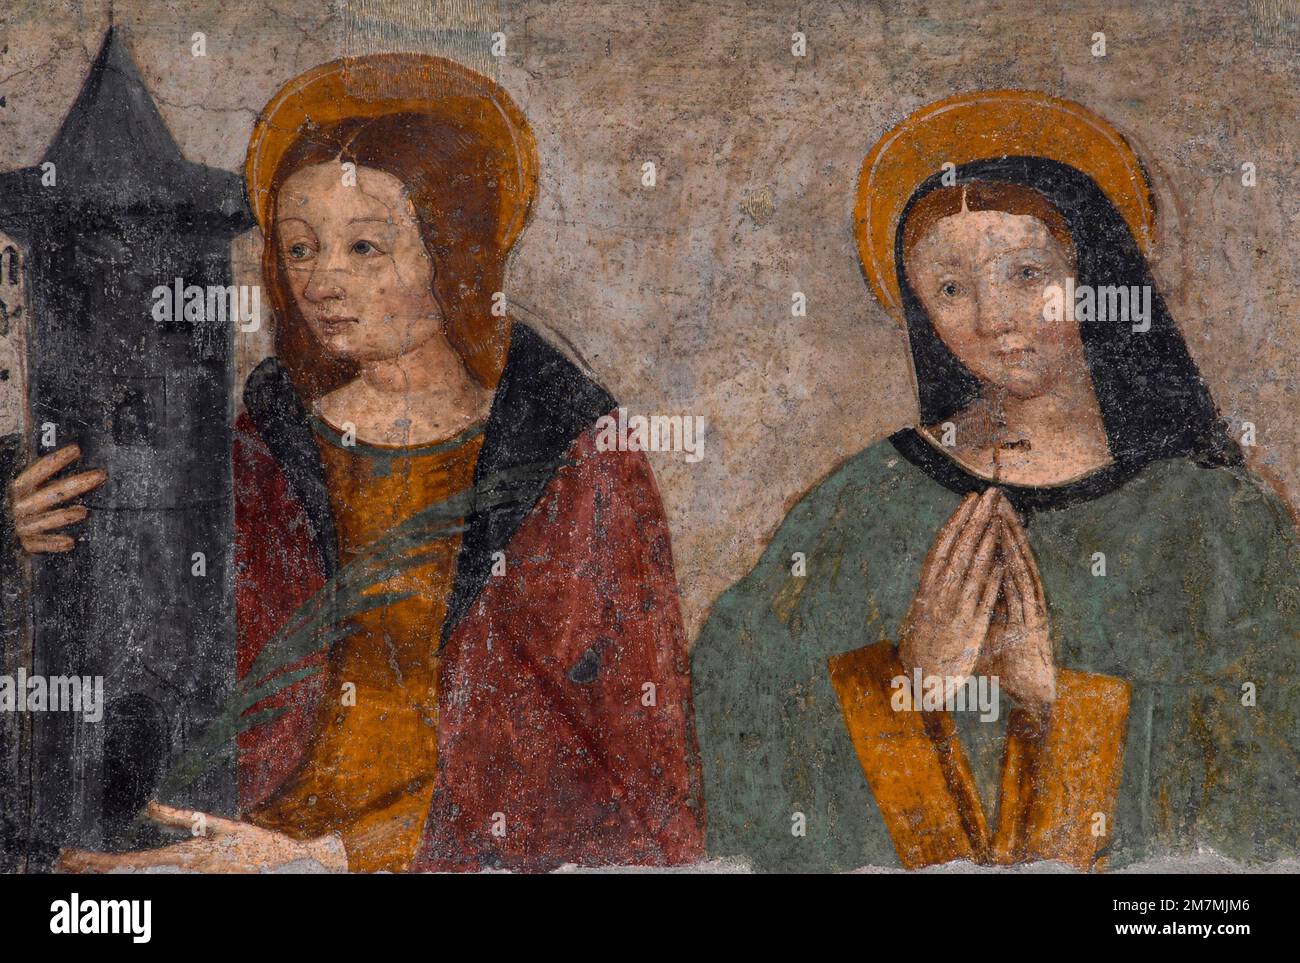 Saint Barbara (left) and Saint Margherita or Margaret of Cortona depicted in damaged Renaissance fresco, painted in 1512, on west front of deconsecrated Cappella di San Grato (Chapel of St Gratus) in Via Jean-Baptiste De Tillier in the historic centre of Aosta, regional capital of the Valle d’Aosta in northwest Italy.  Saint Barbara holds a three-windowed tower.  The tower symbolises Barbara’s imprisonment by her father.  The three windows - which she ordered be inserted in her prison - symbolise the Holy Trinity. Stock Photo